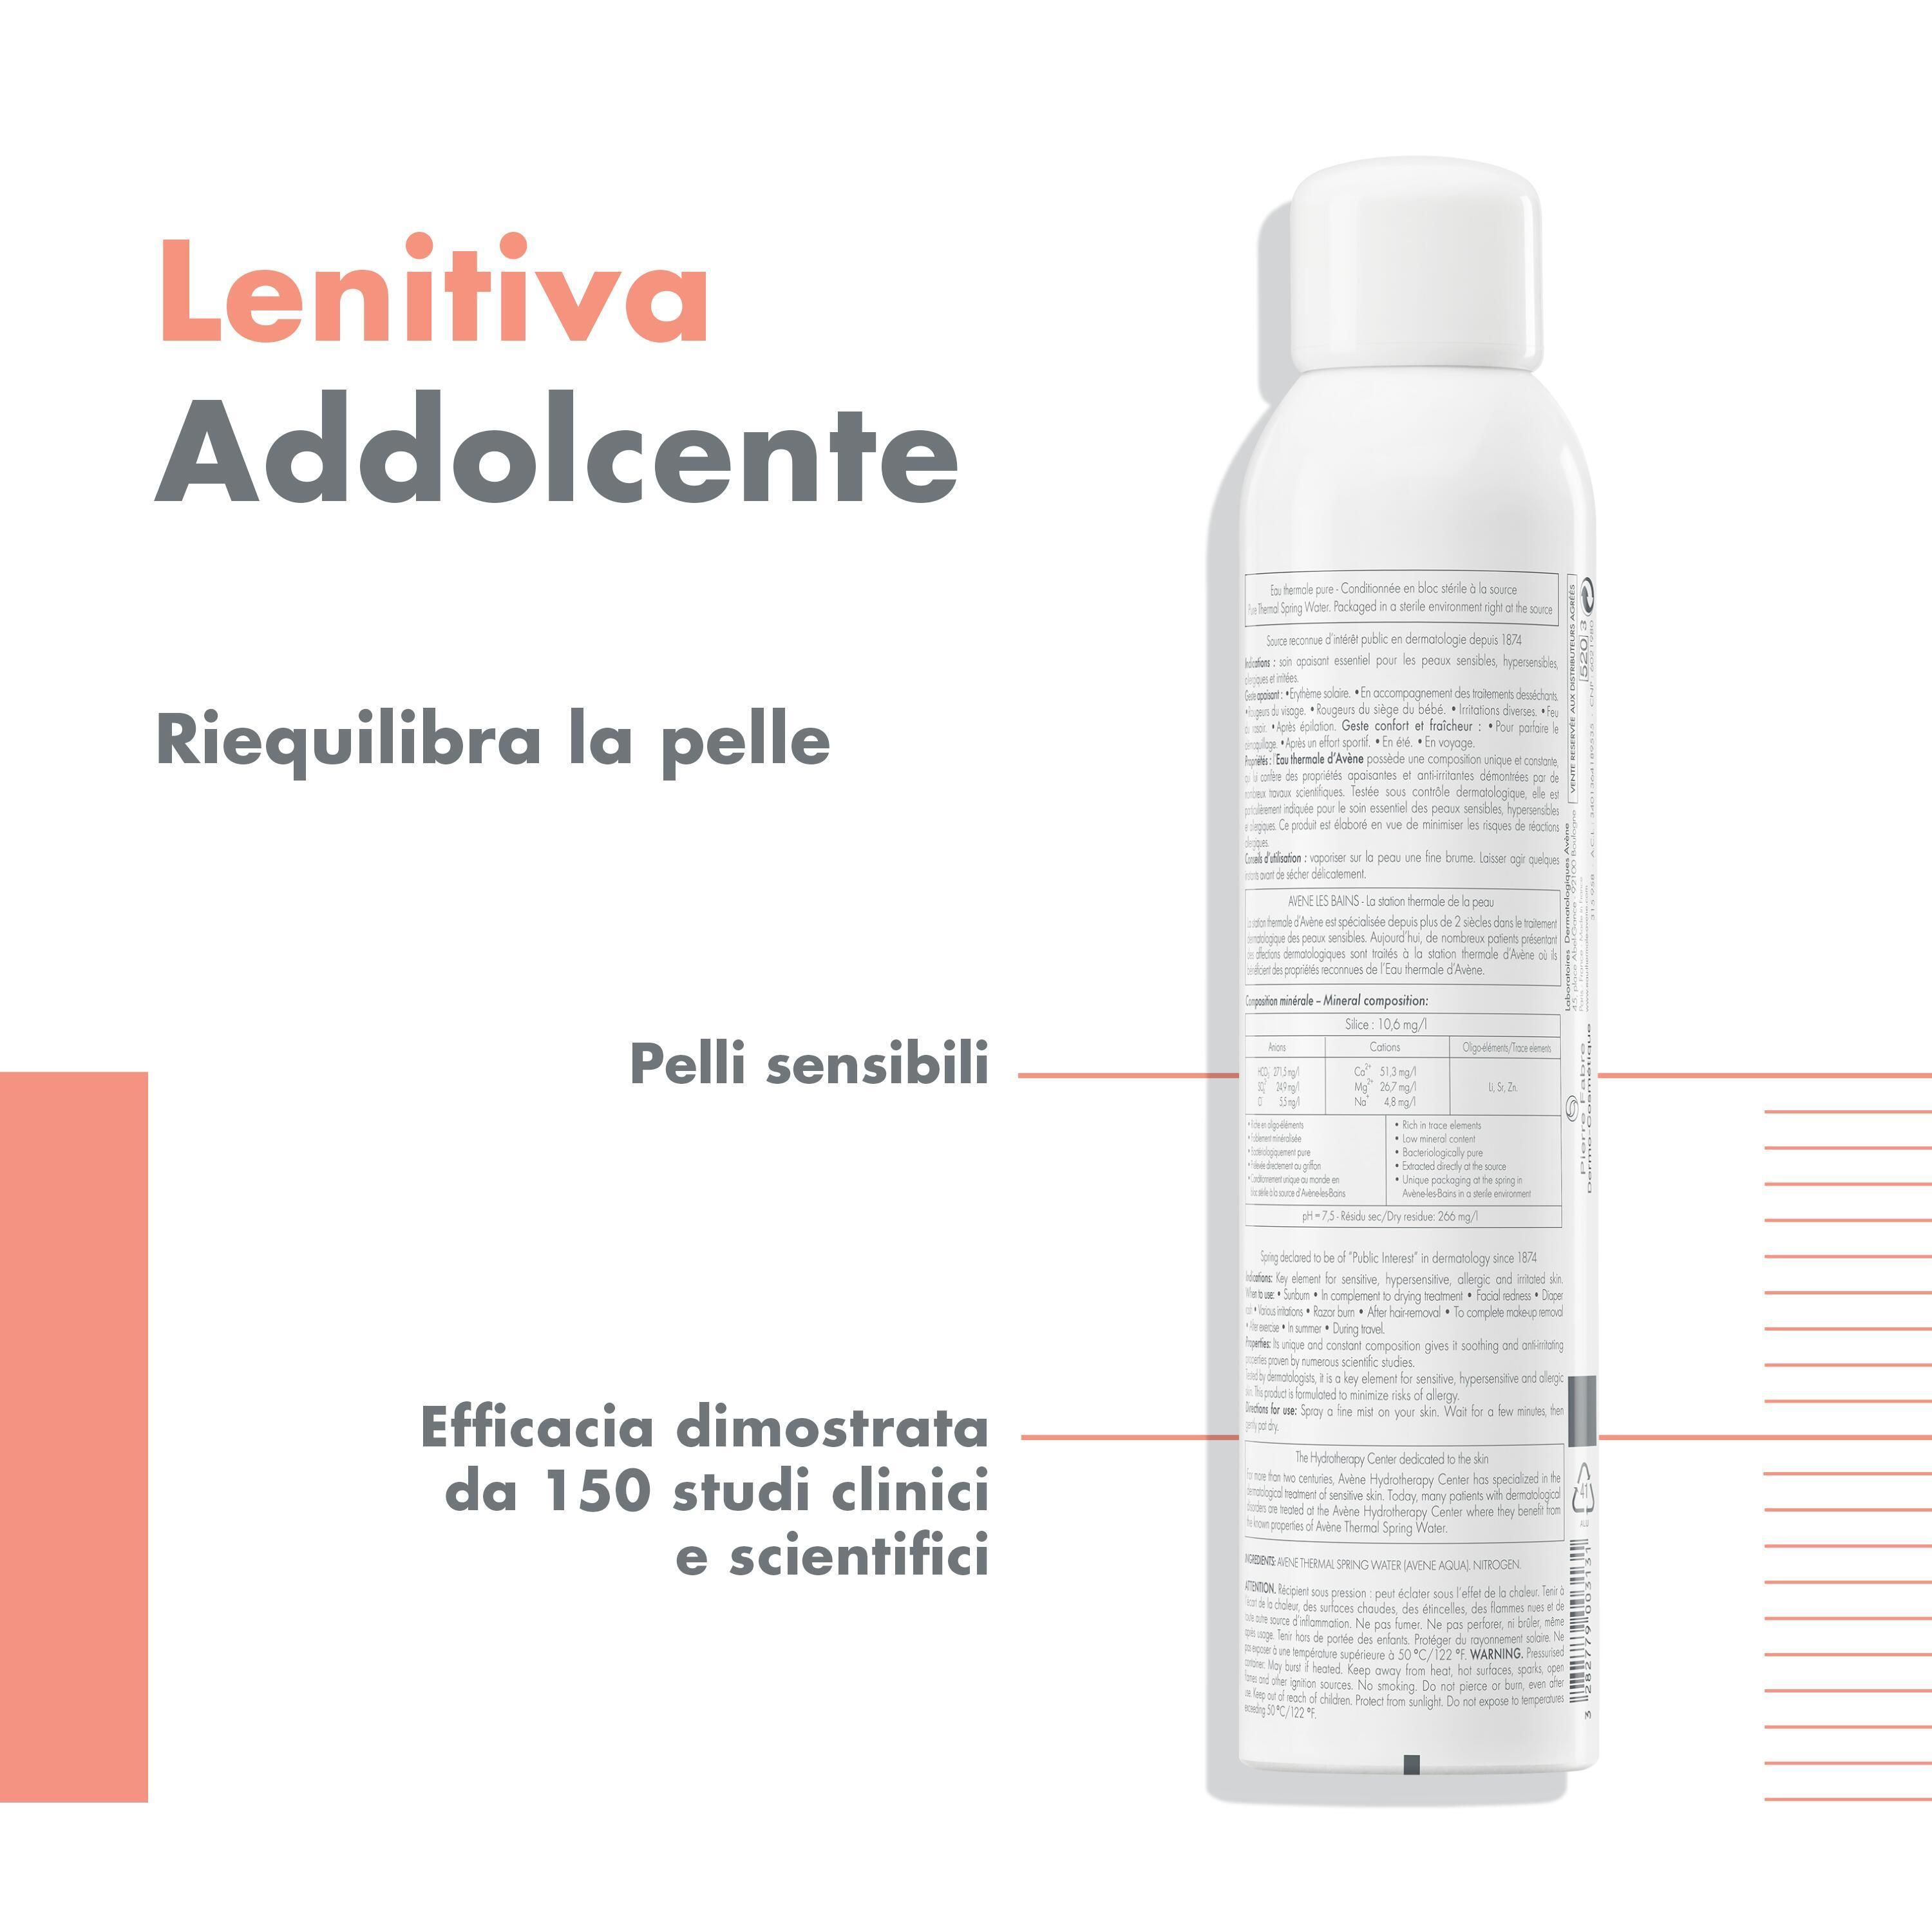 Acqua Termale Avène Spray 30 Years Limited Edition